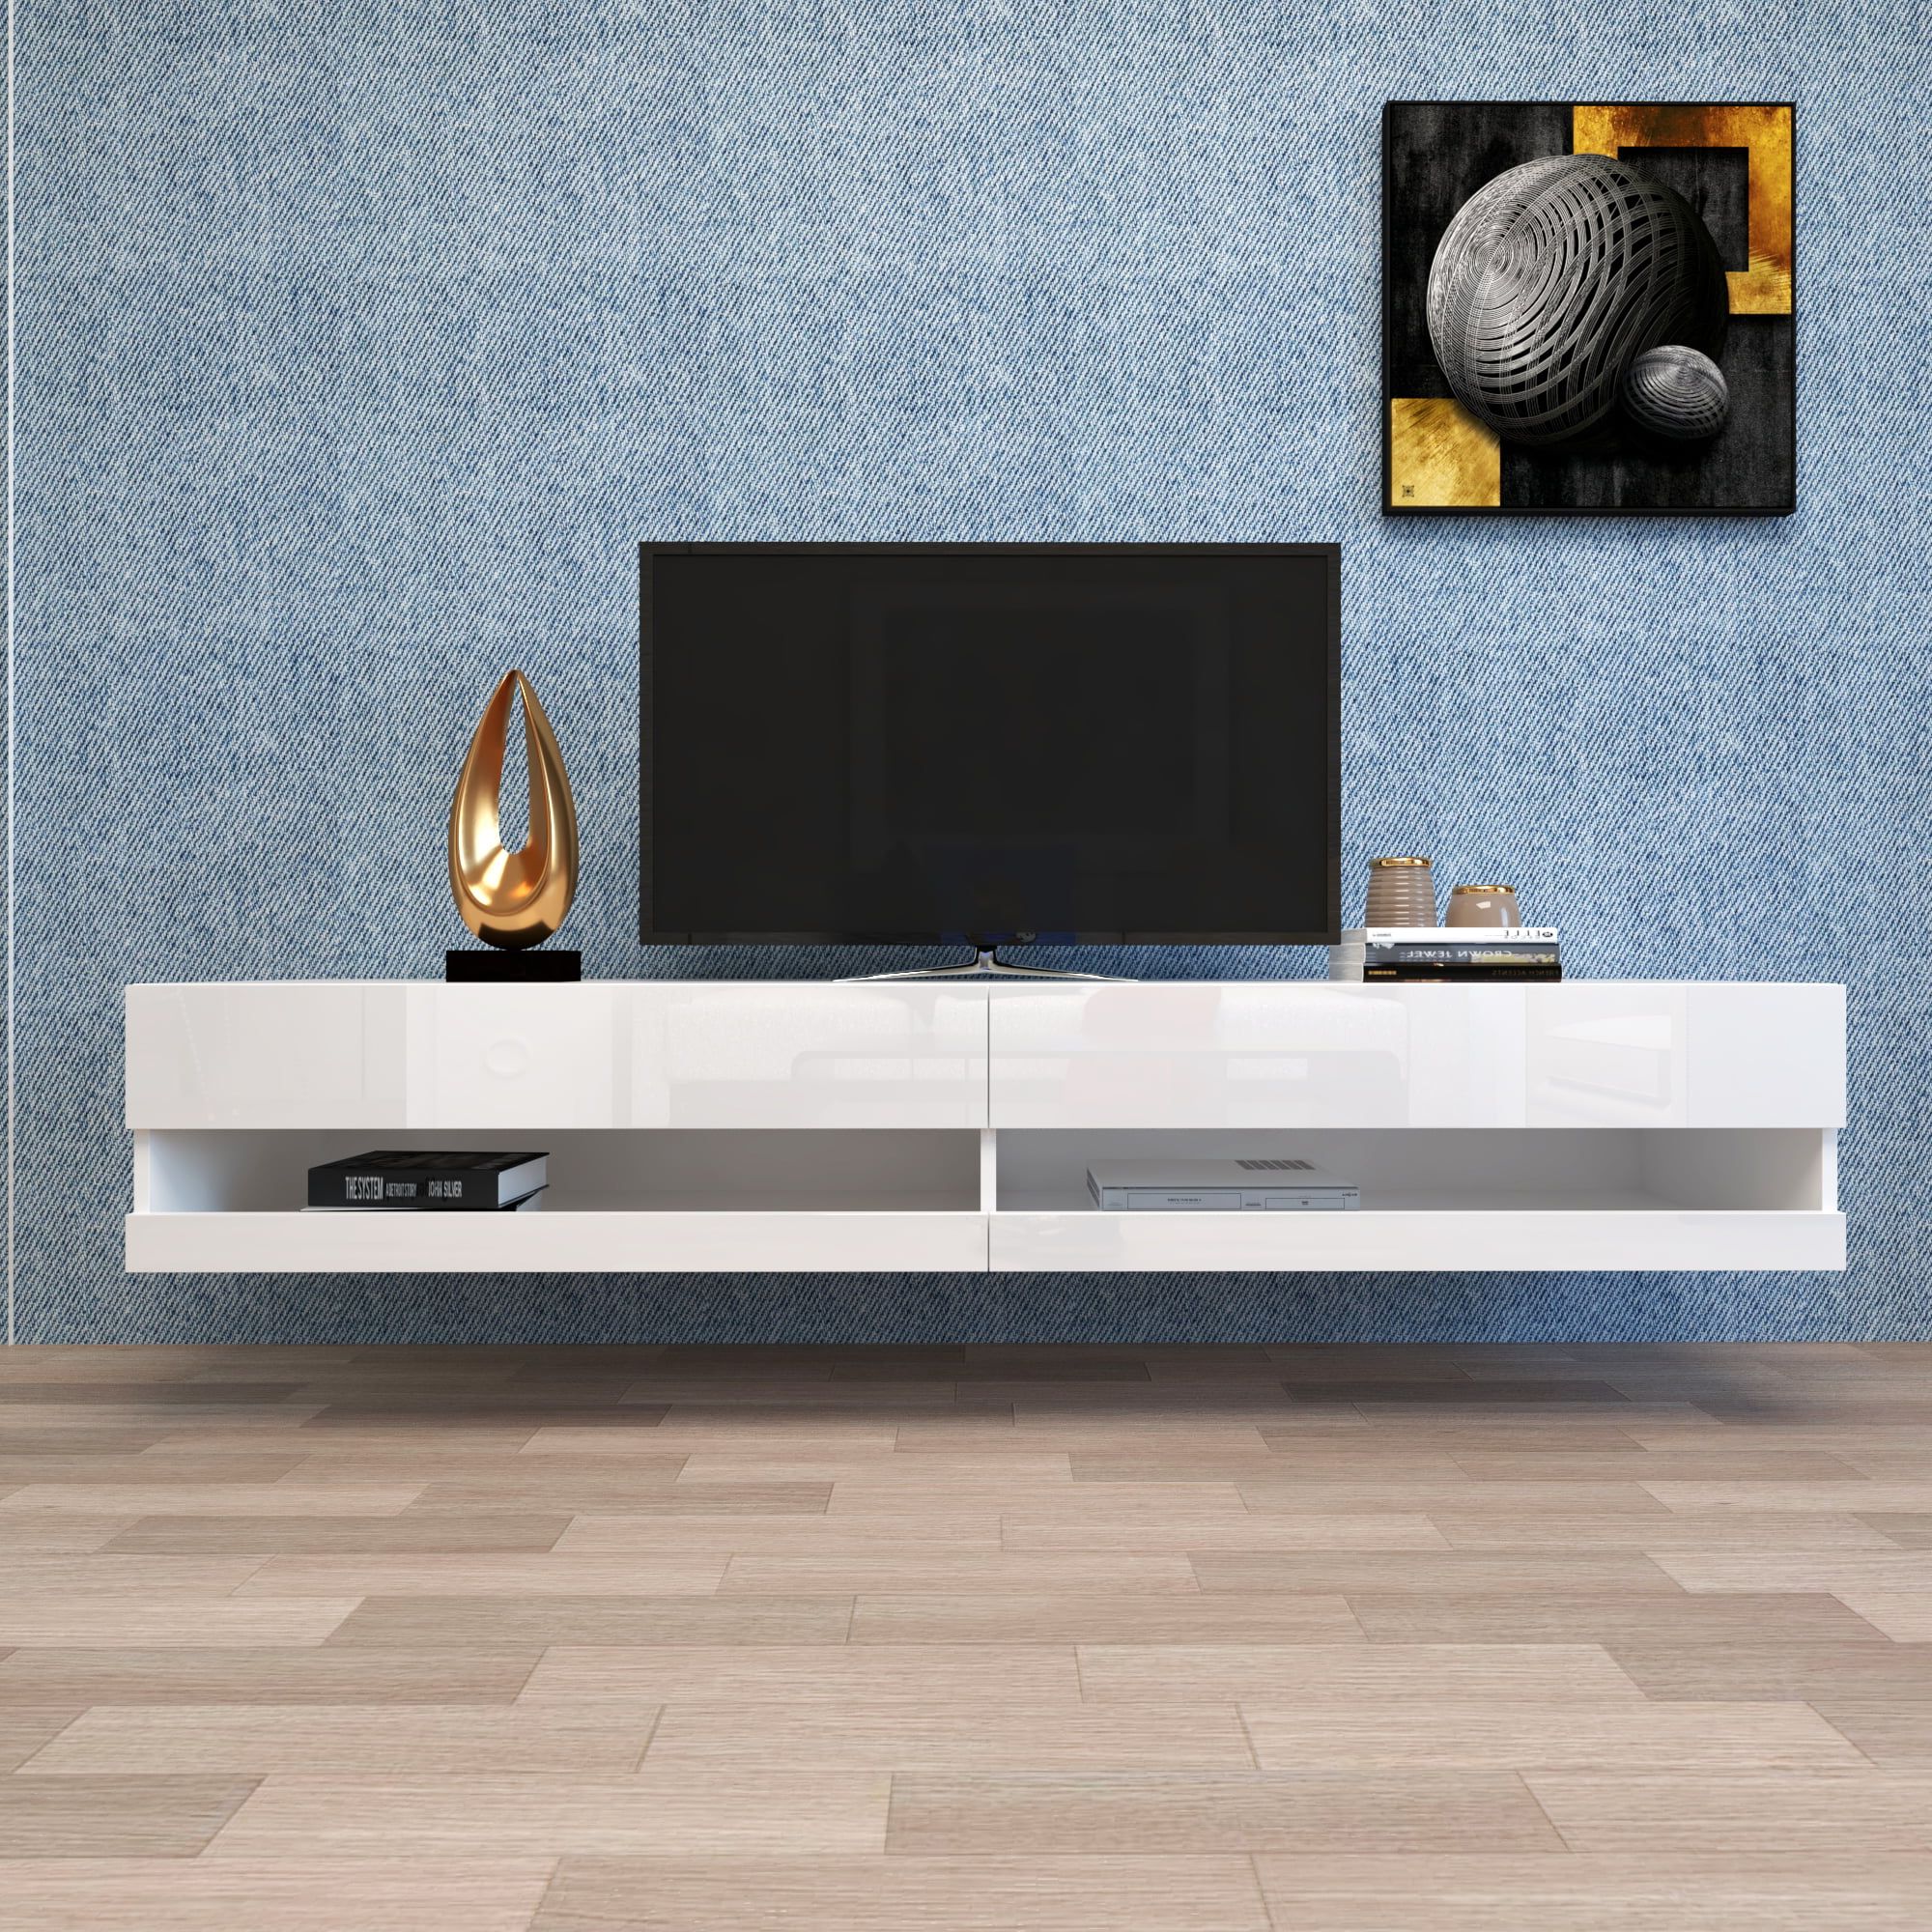 Wall Mounted Floating Tv Stands With Well Known White Wall Mounted Tv Stand, Segmart Led Tv Cabinet For 80 Inch Tv (View 14 of 15)